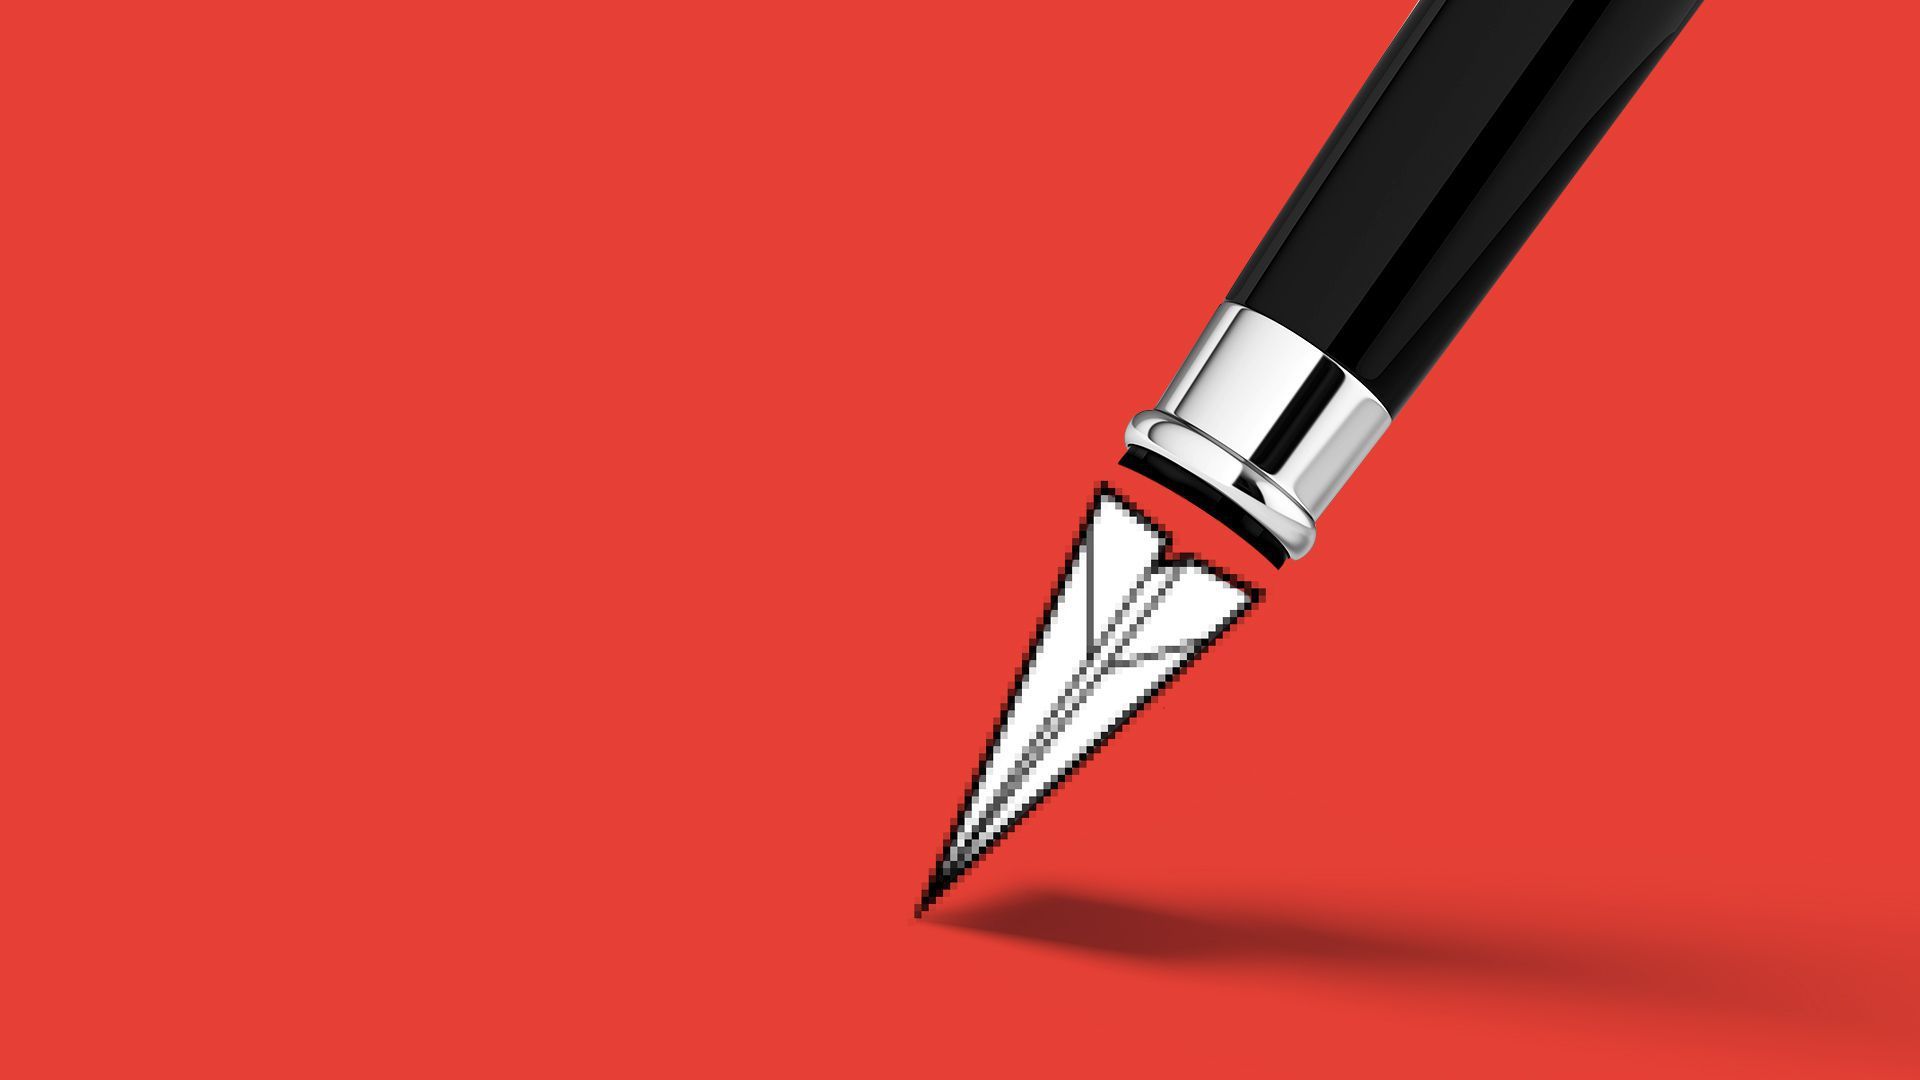 Illustration of a pen with a digital tip.